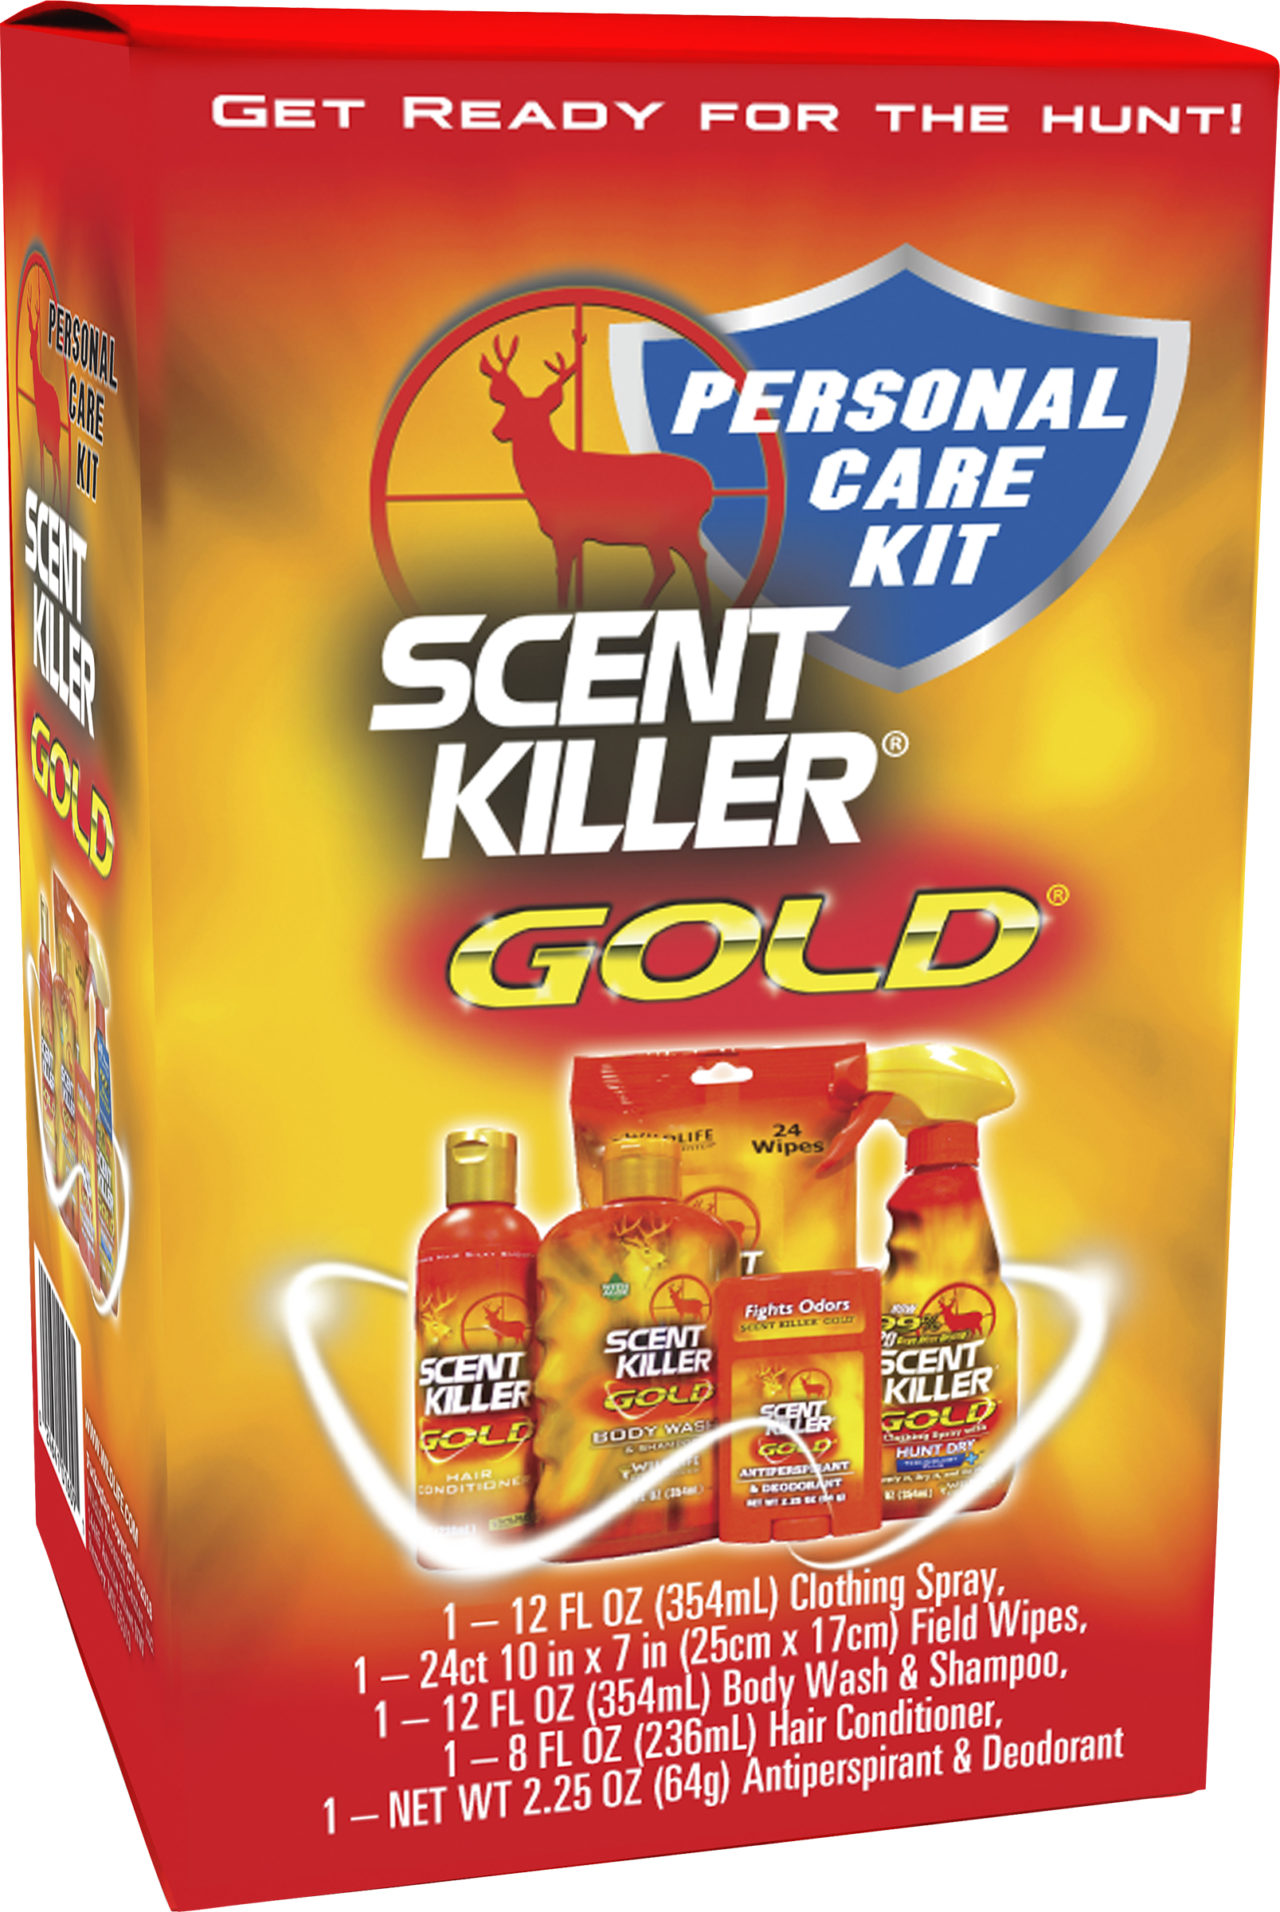 WRC Introduces New Scent Killer Gold Personal Care Kit